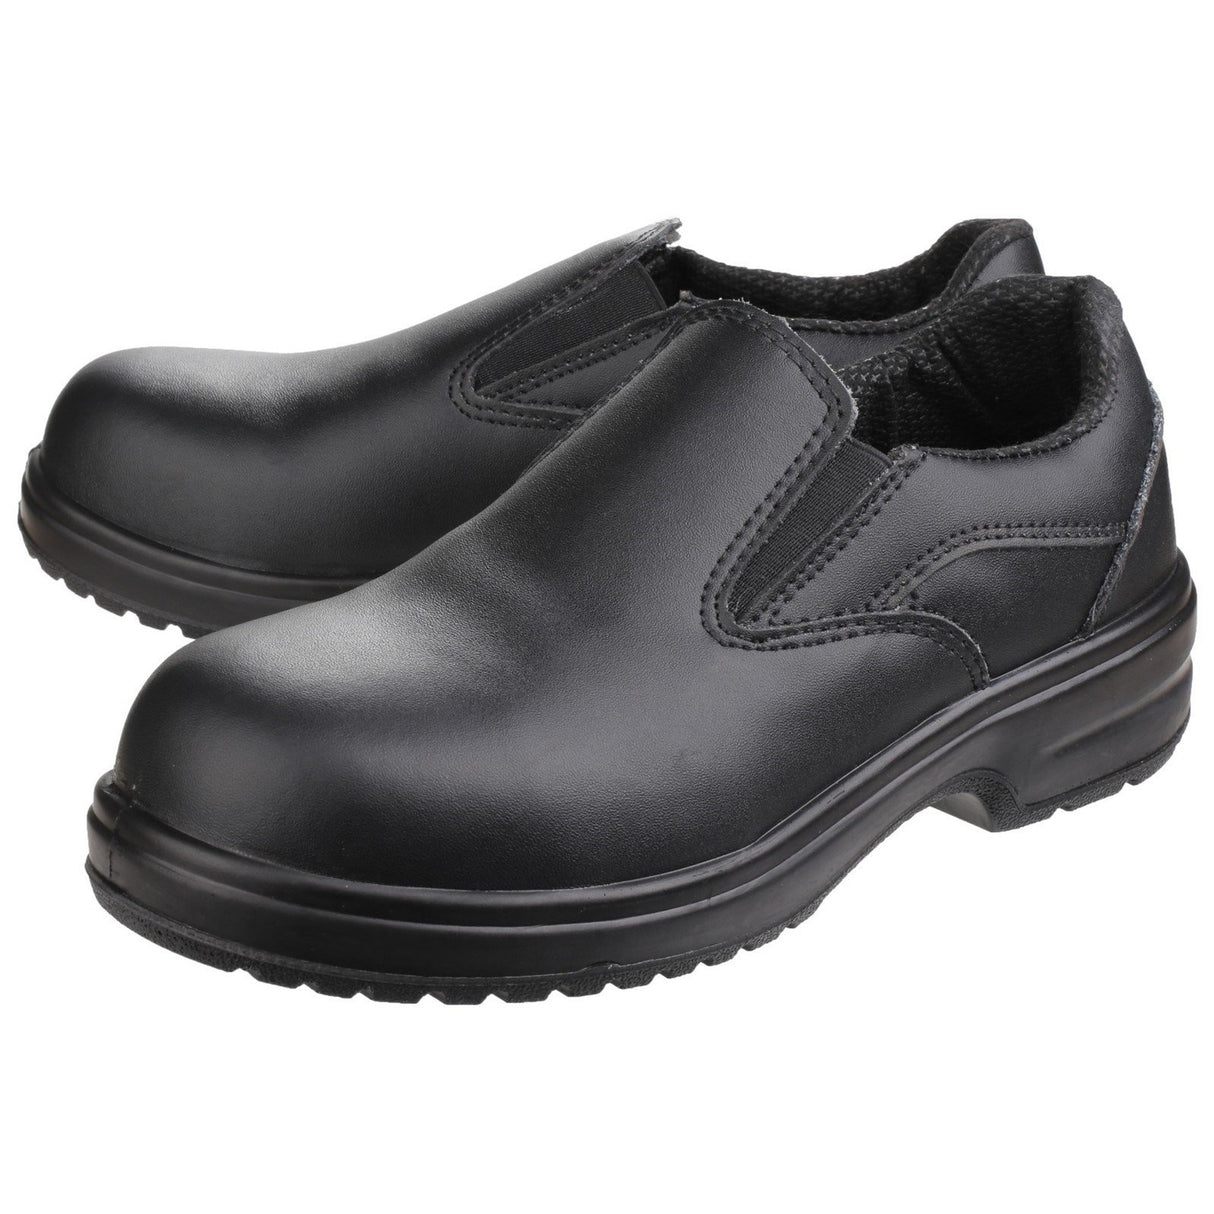 Amblers Safety Ladies Slip On Safety Shoes